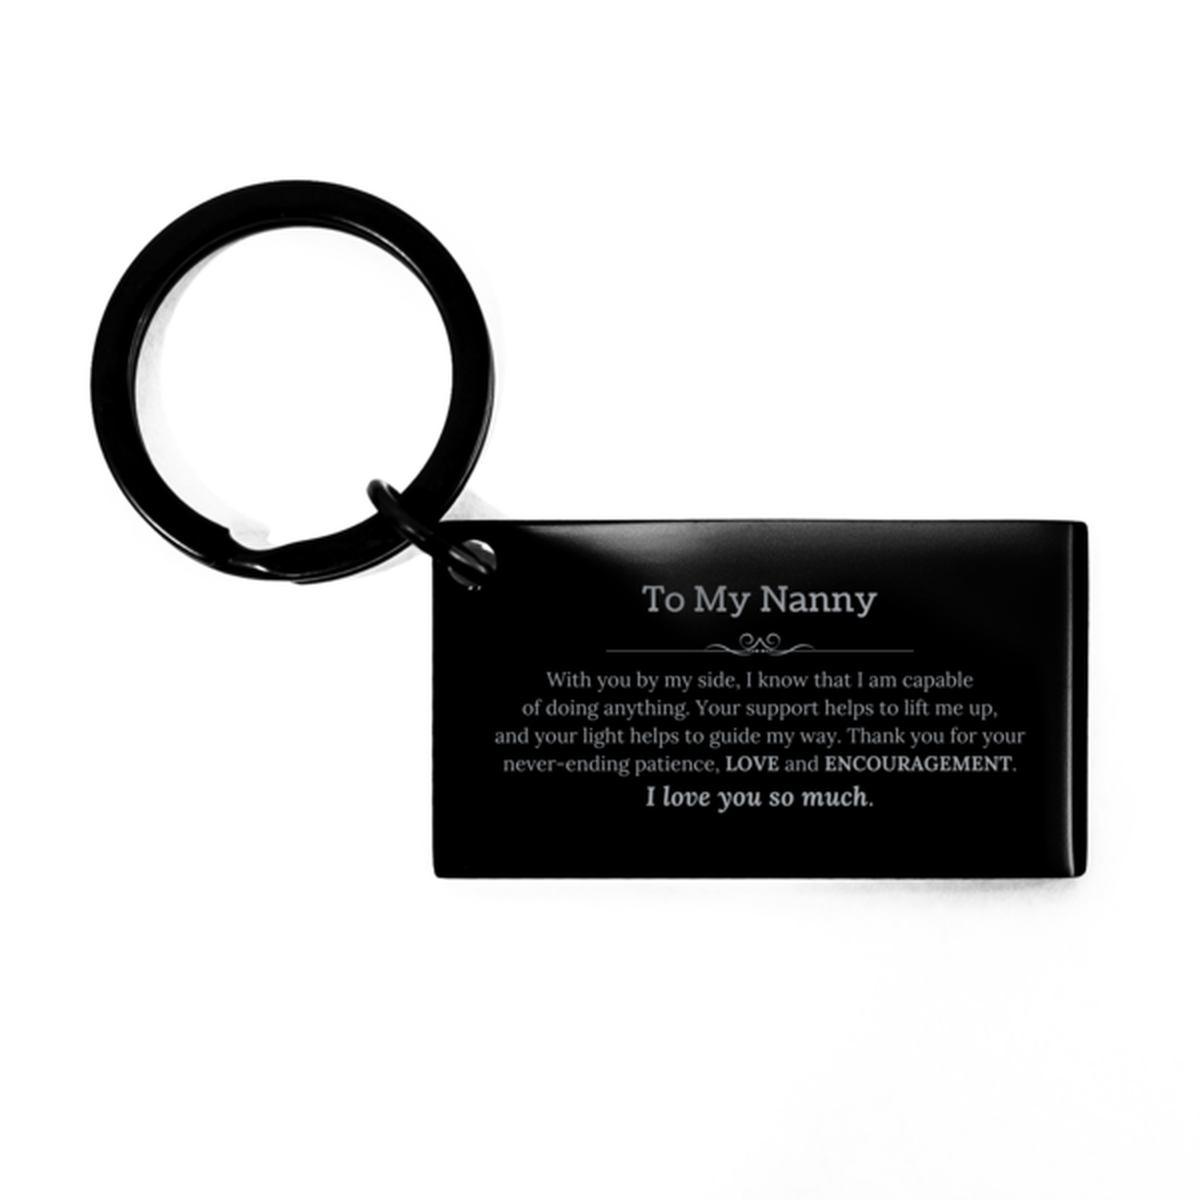 Appreciation Nanny Keychain Gifts, To My Nanny Birthday Christmas Wedding Keepsake Gifts for Nanny With you by my side, I know that I am capable of doing anything. I love you so much